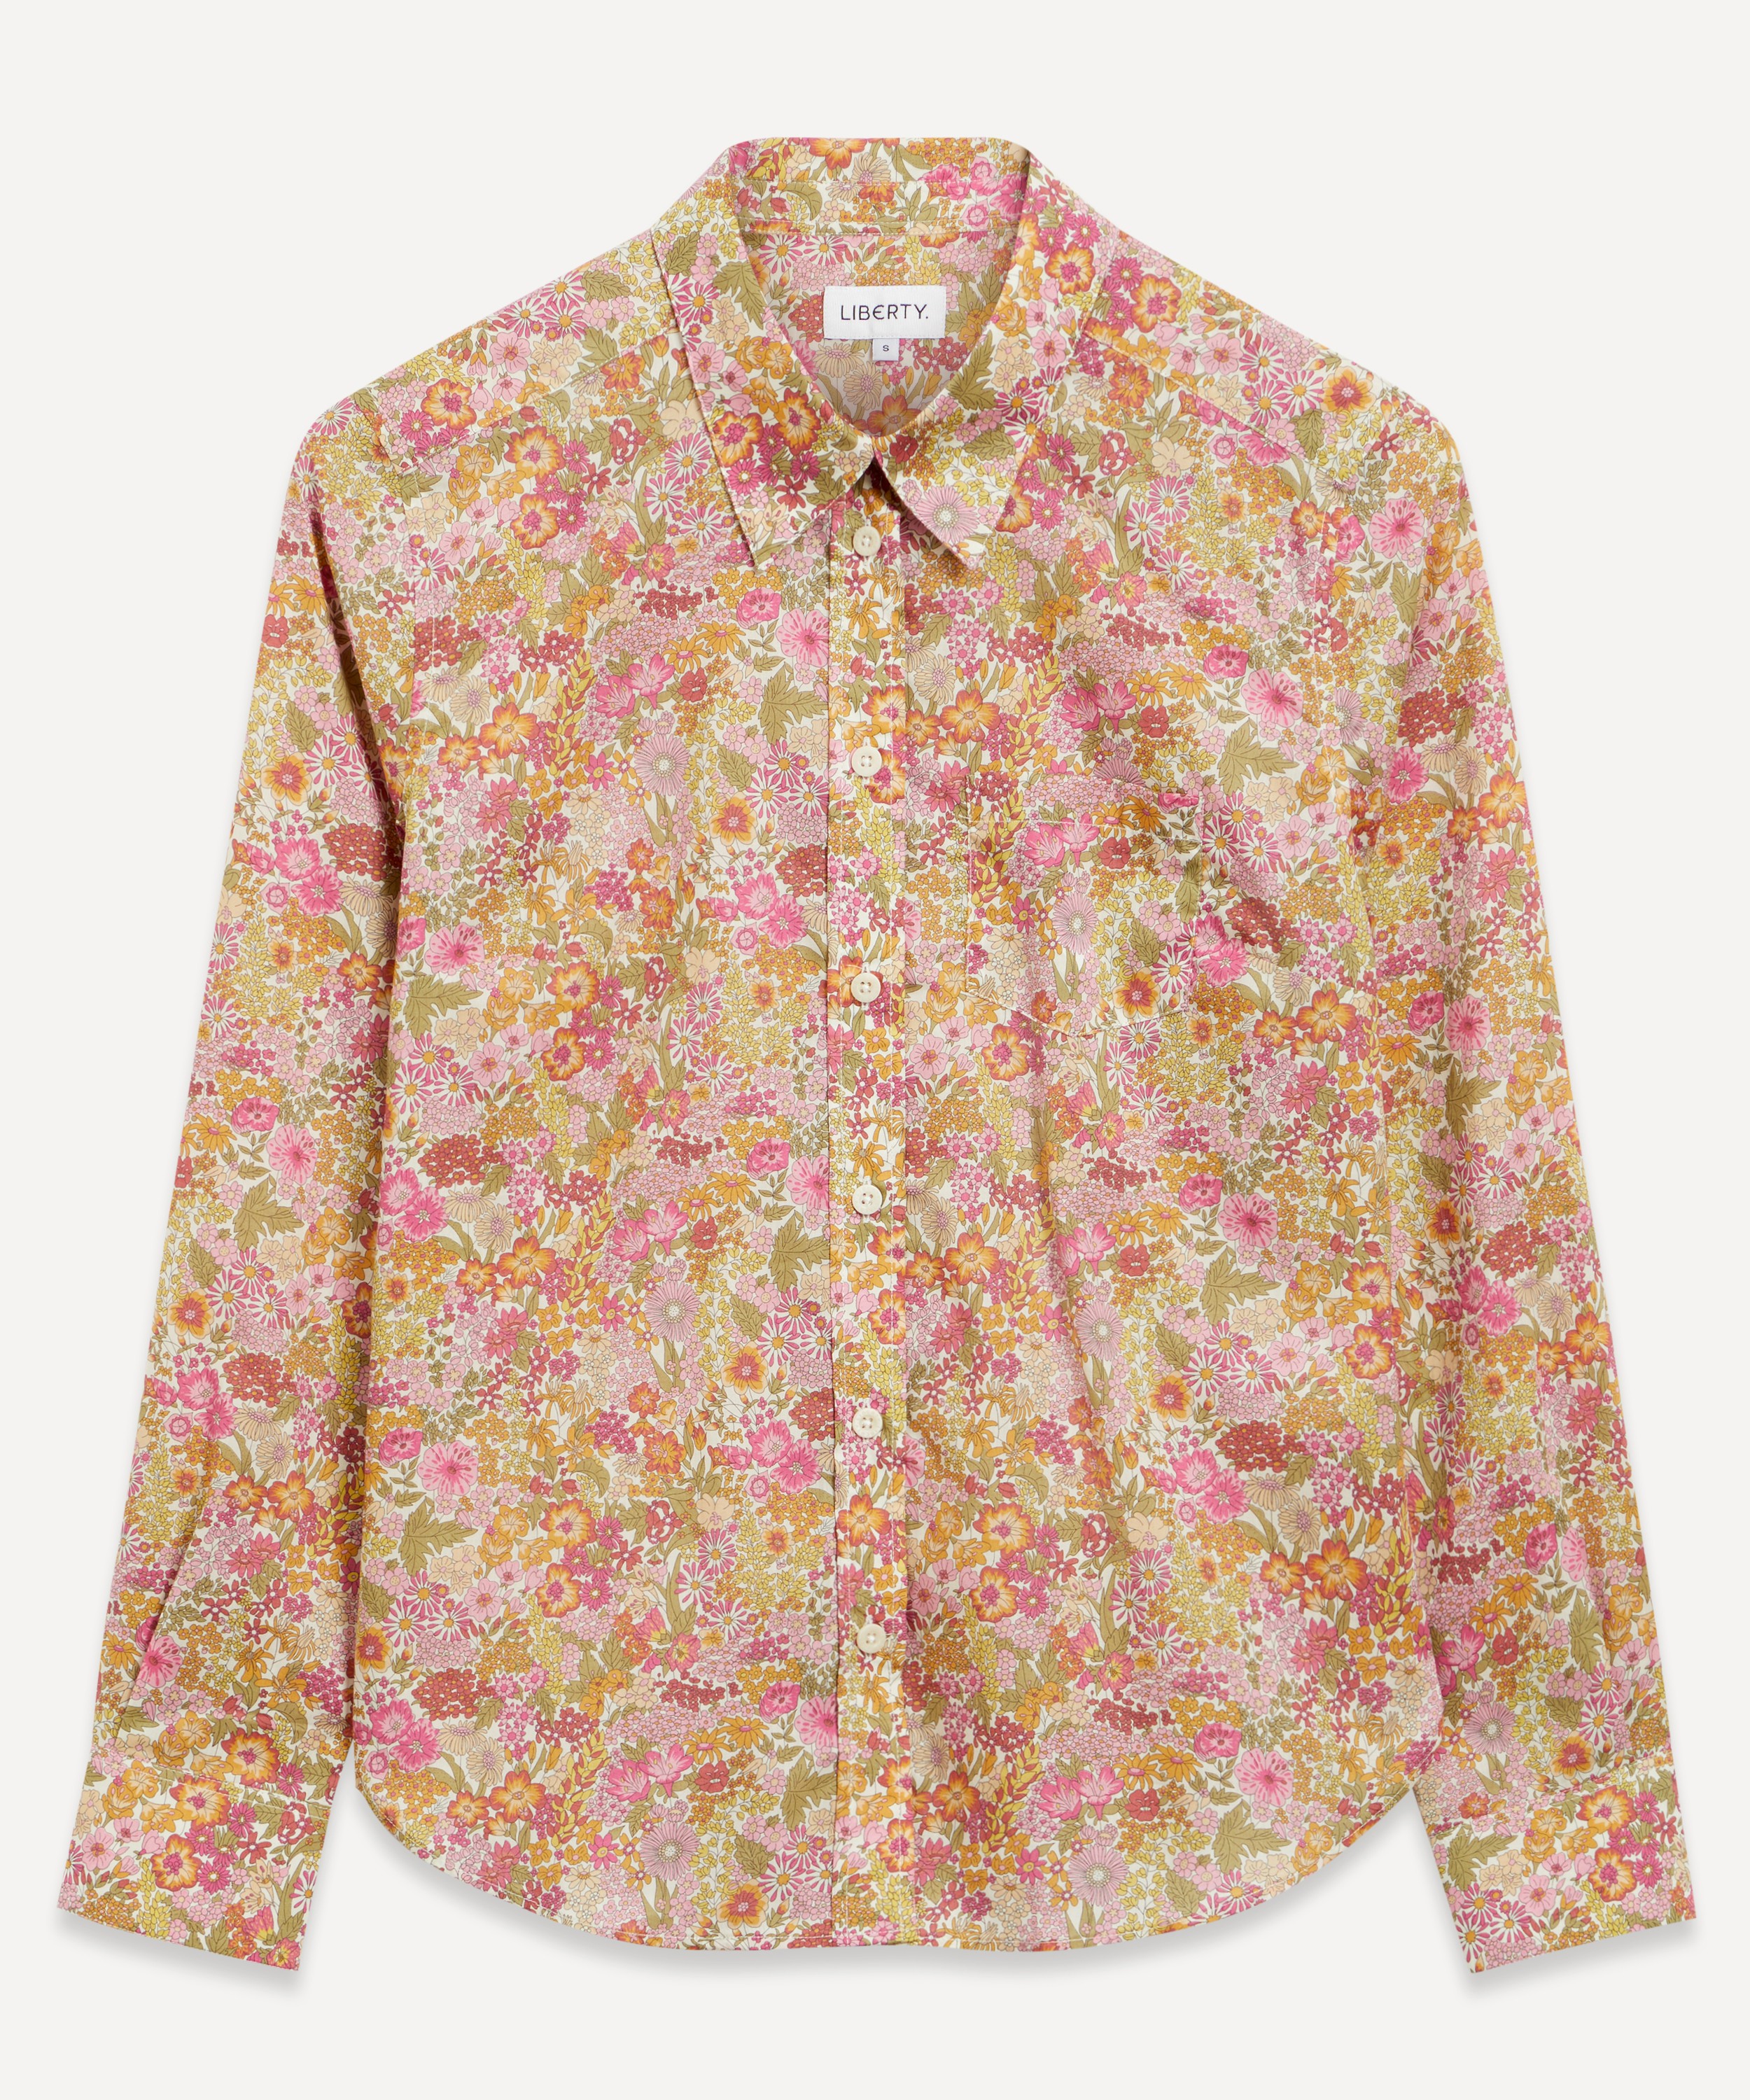 Liberty - Margaret Annie Fitted Tana Lawn™ Cotton Shirt